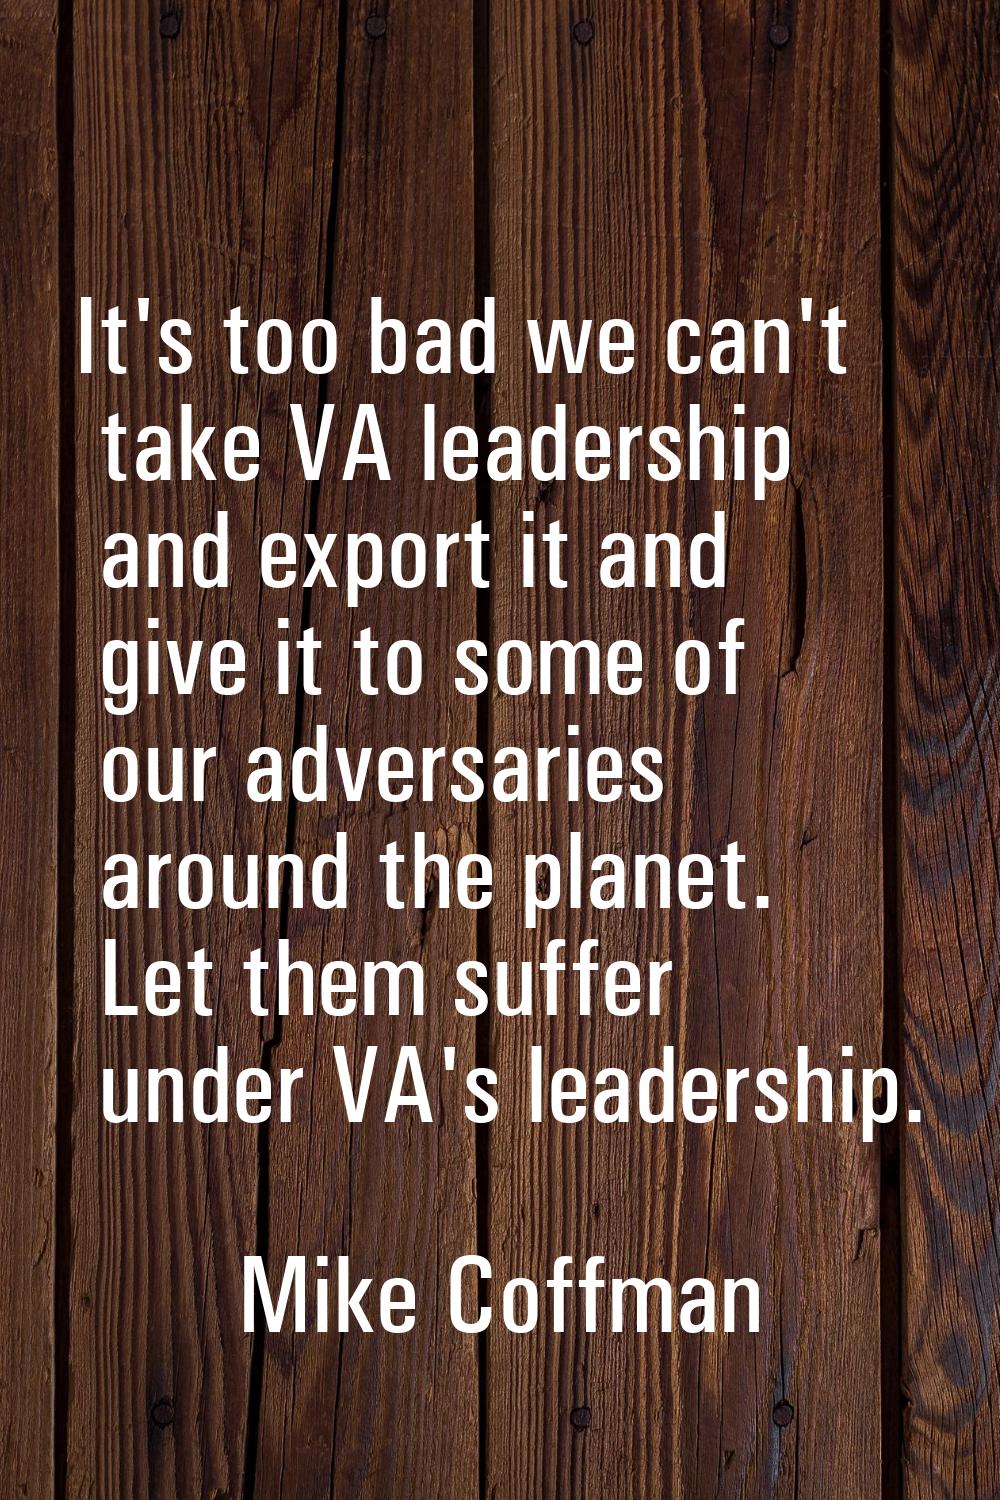 It's too bad we can't take VA leadership and export it and give it to some of our adversaries aroun